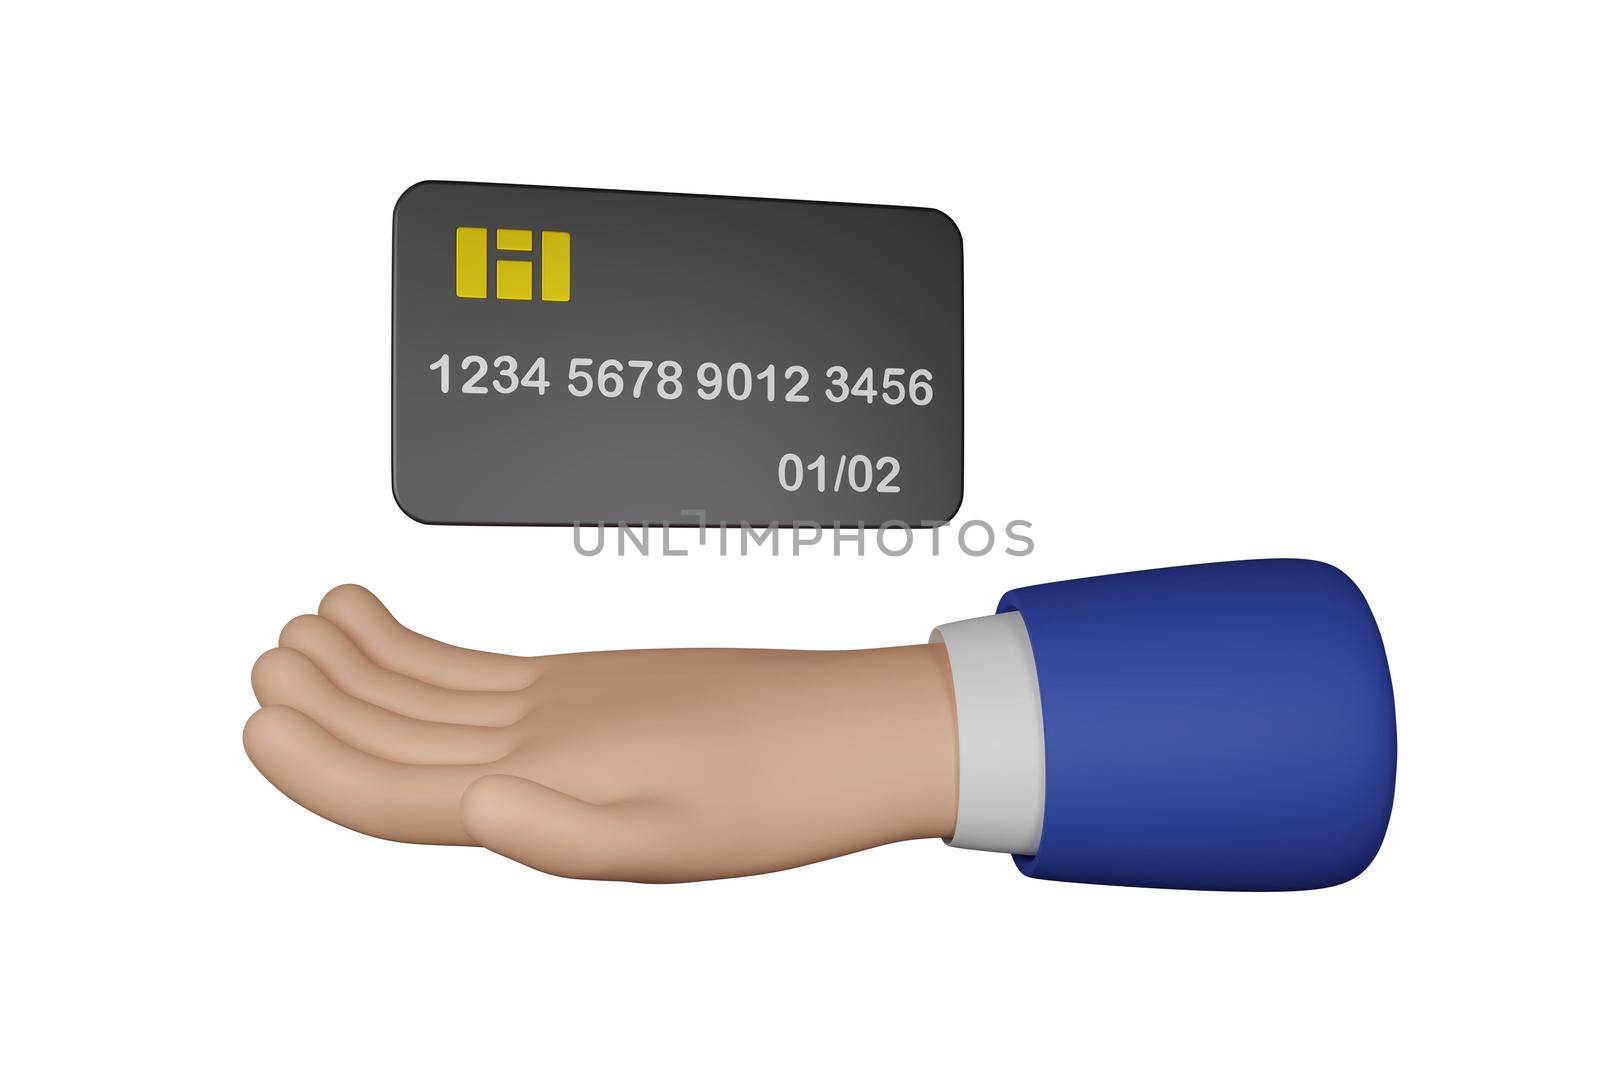 3D Cartoon businessman character hand holds a credit card isolated on white background. Hand gesture friendly funny style. 3d rendering.